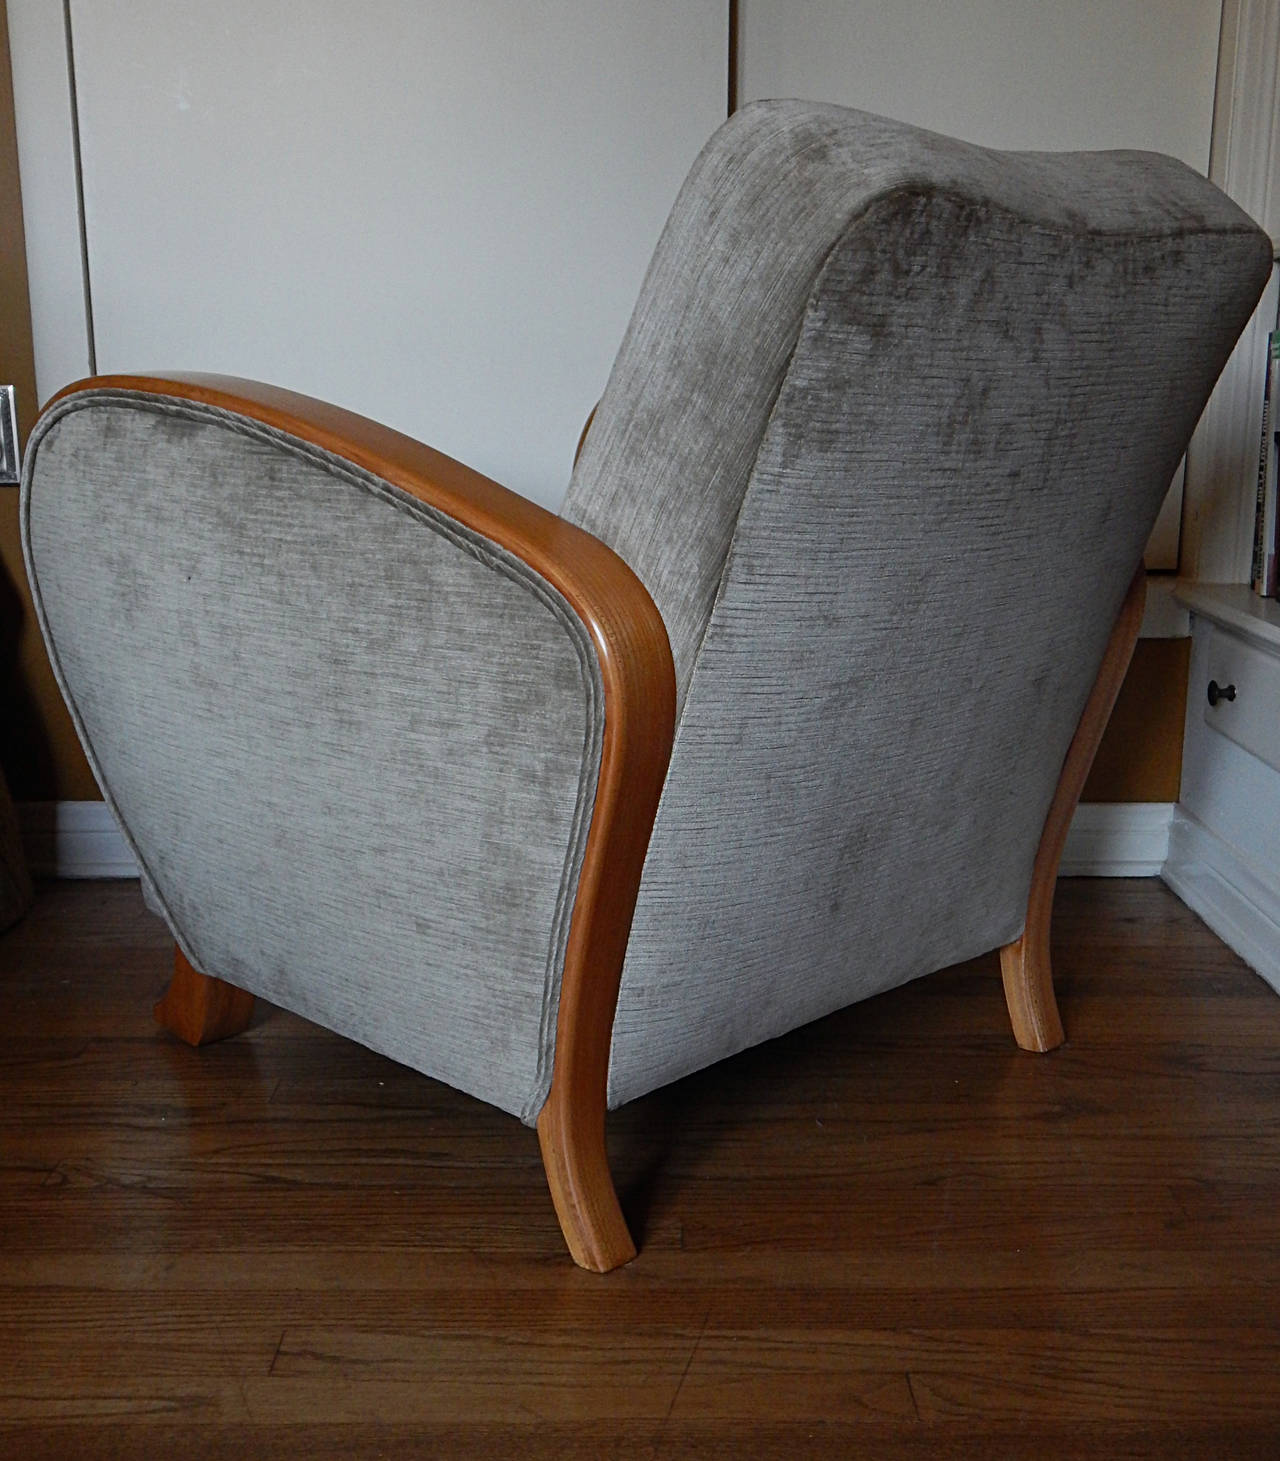 Pair of Swedish Art Deco Armchairs in Golden Elm, circa 1930 In Excellent Condition For Sale In Richmond, VA